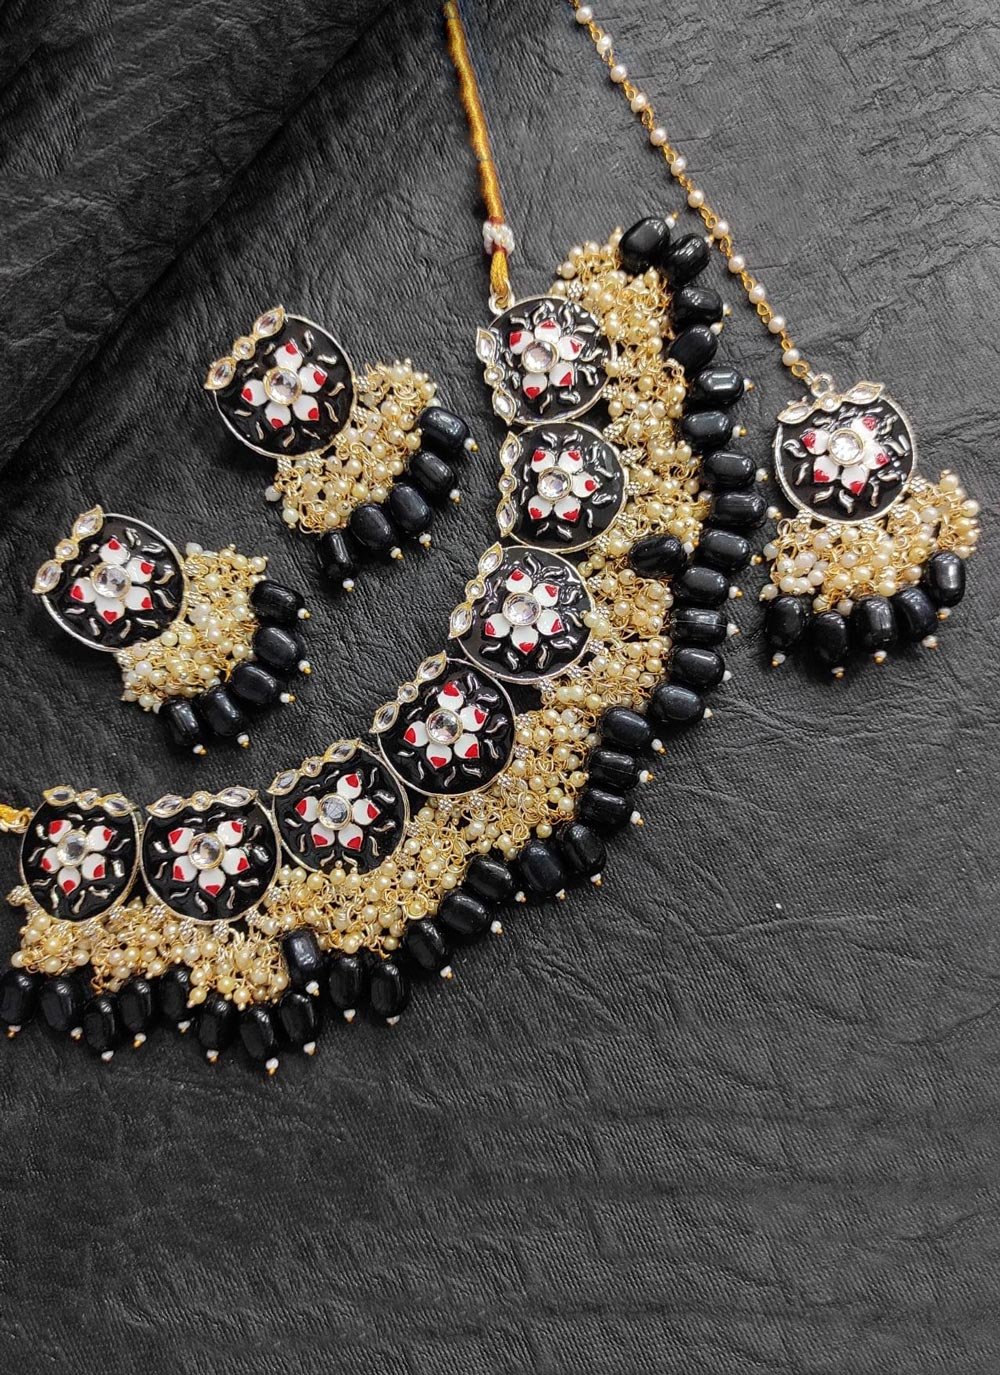 Unique Gold Rodium Polish Beads Work Alloy Black and Off White Necklace Set For Festival